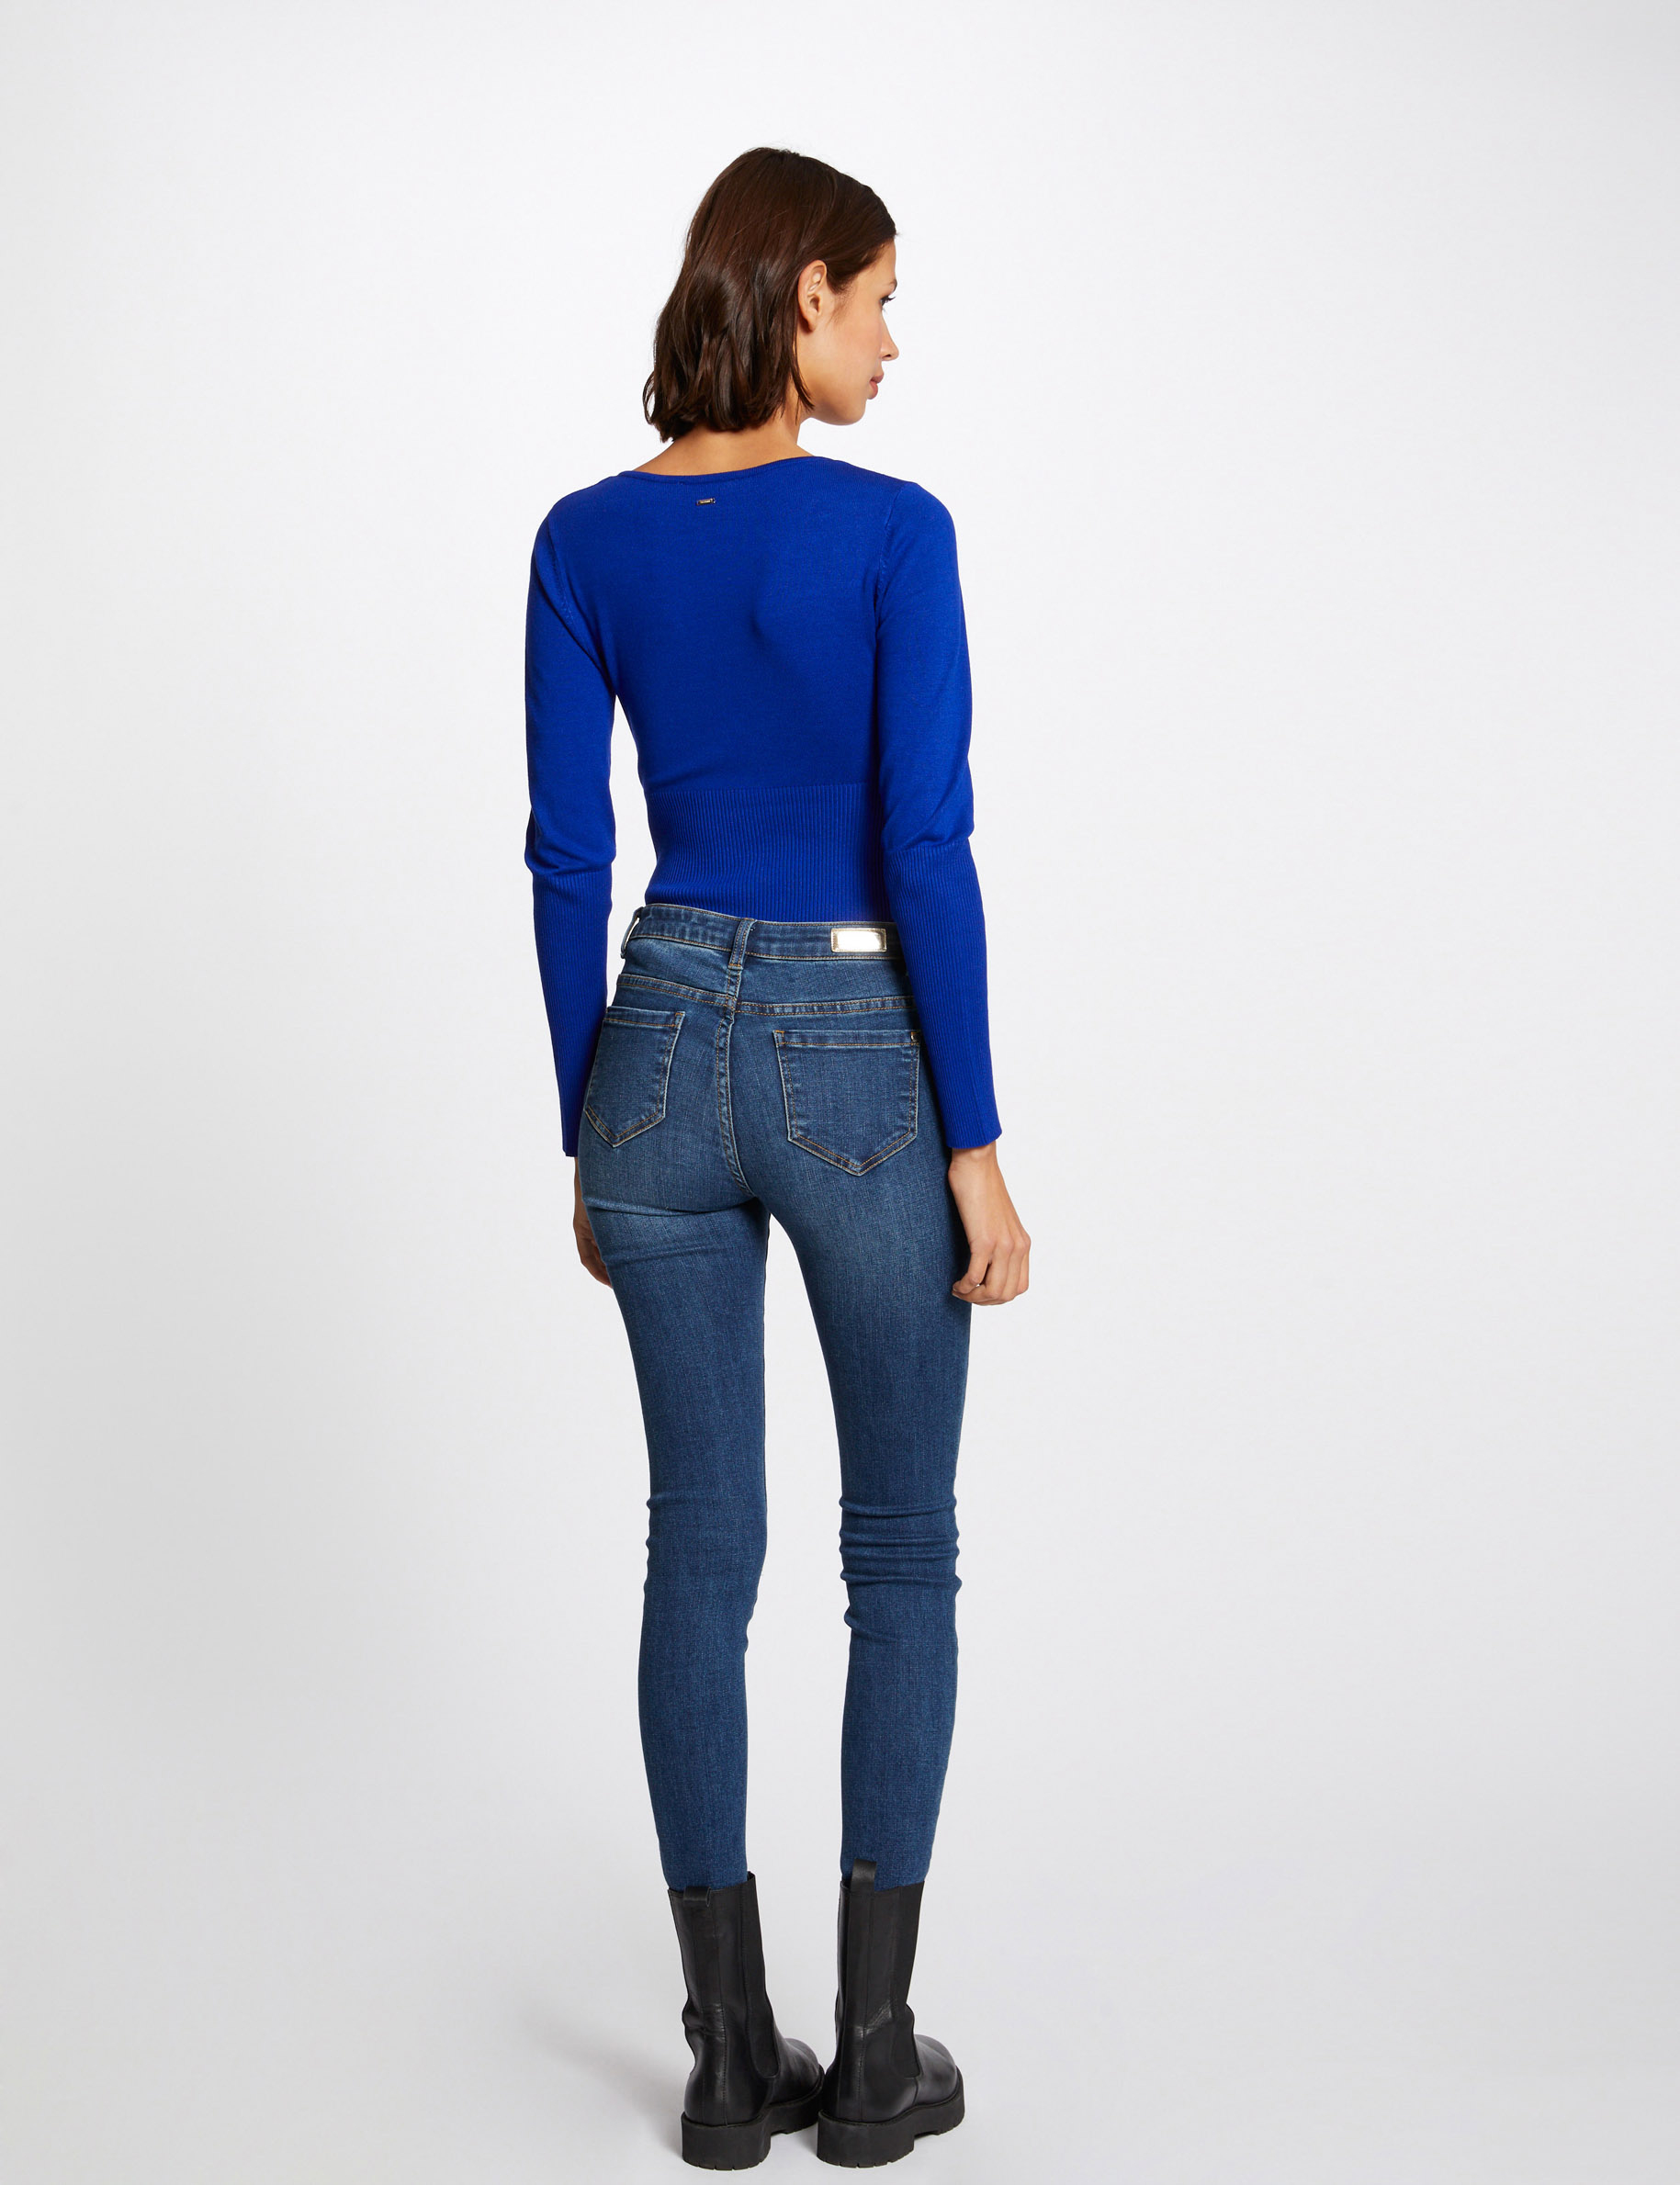 Long-sleeved jumper with zipped detail electric blue ladies'